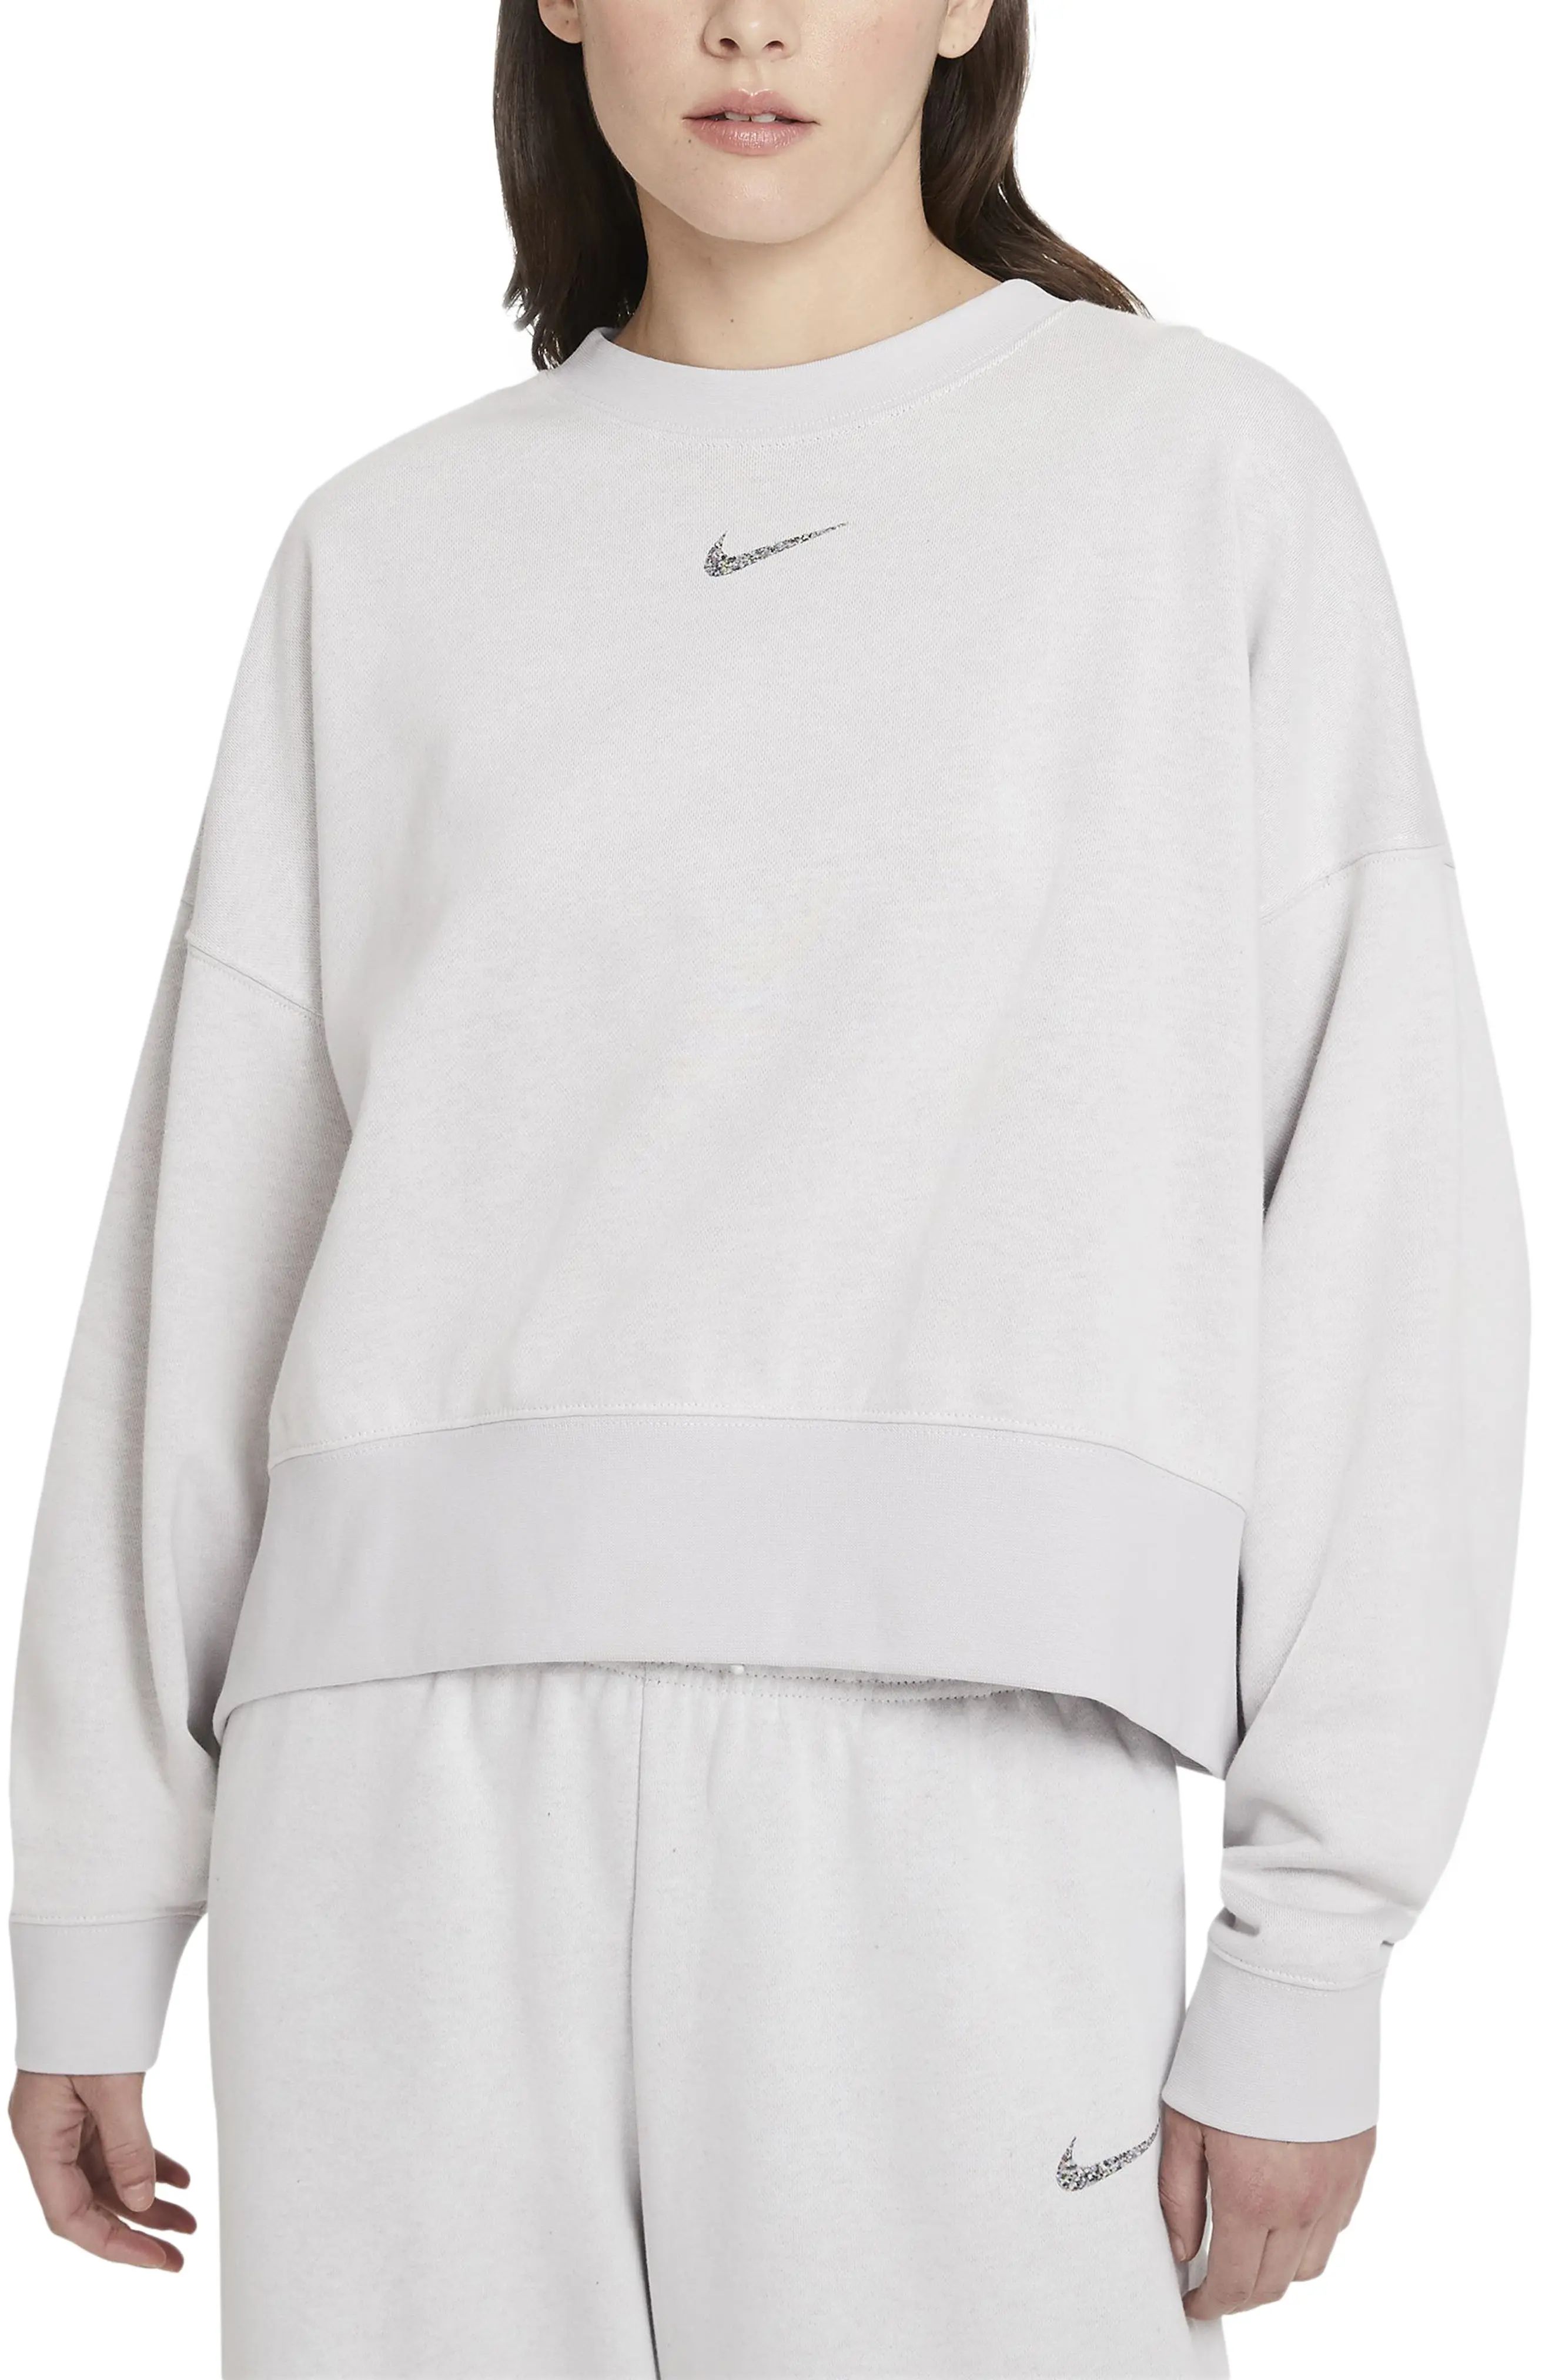 Nike Sportswear Oversize Fleece Crew Sweater, Size Large in Platinum Tint/white at Nordstrom | Nordstrom